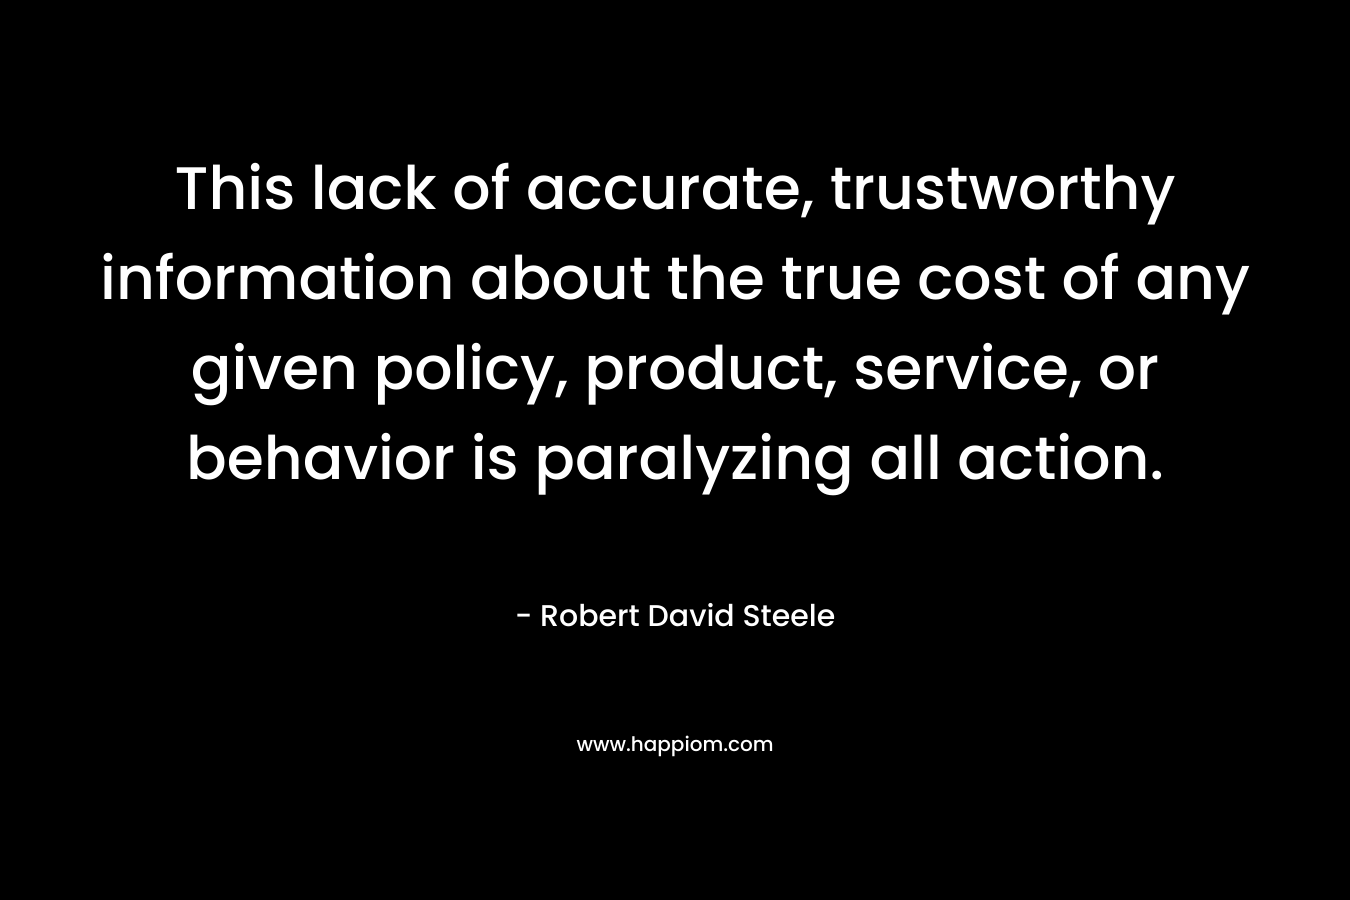 This lack of accurate, trustworthy information about the true cost of any given policy, product, service, or behavior is paralyzing all action. – Robert David Steele